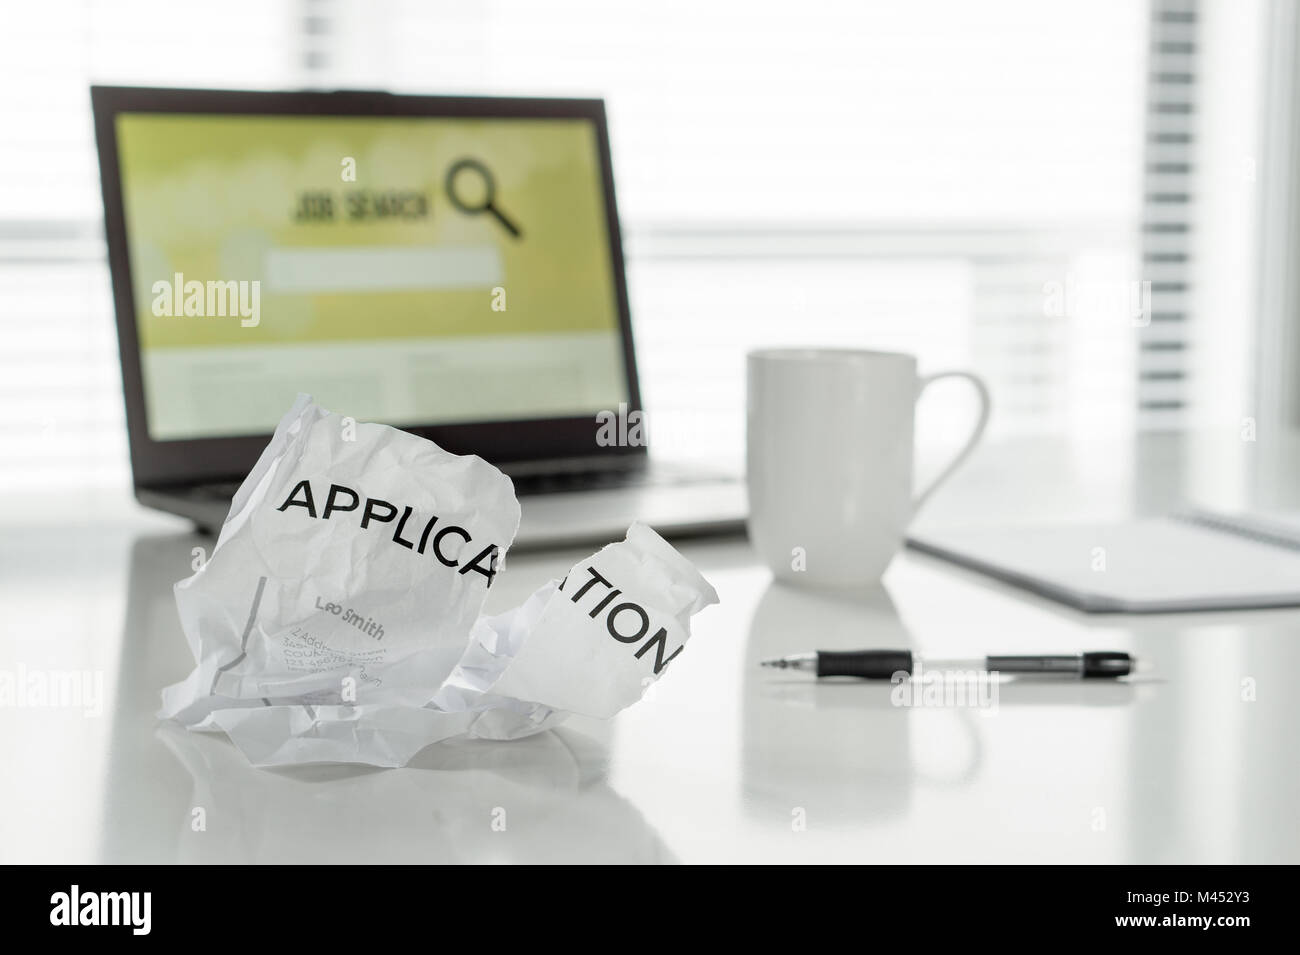 Unable to find work. Unsuccessful job search. Ripped and torn application form paper on home office table. Disappointing job seeking. Problems, anger. Stock Photo